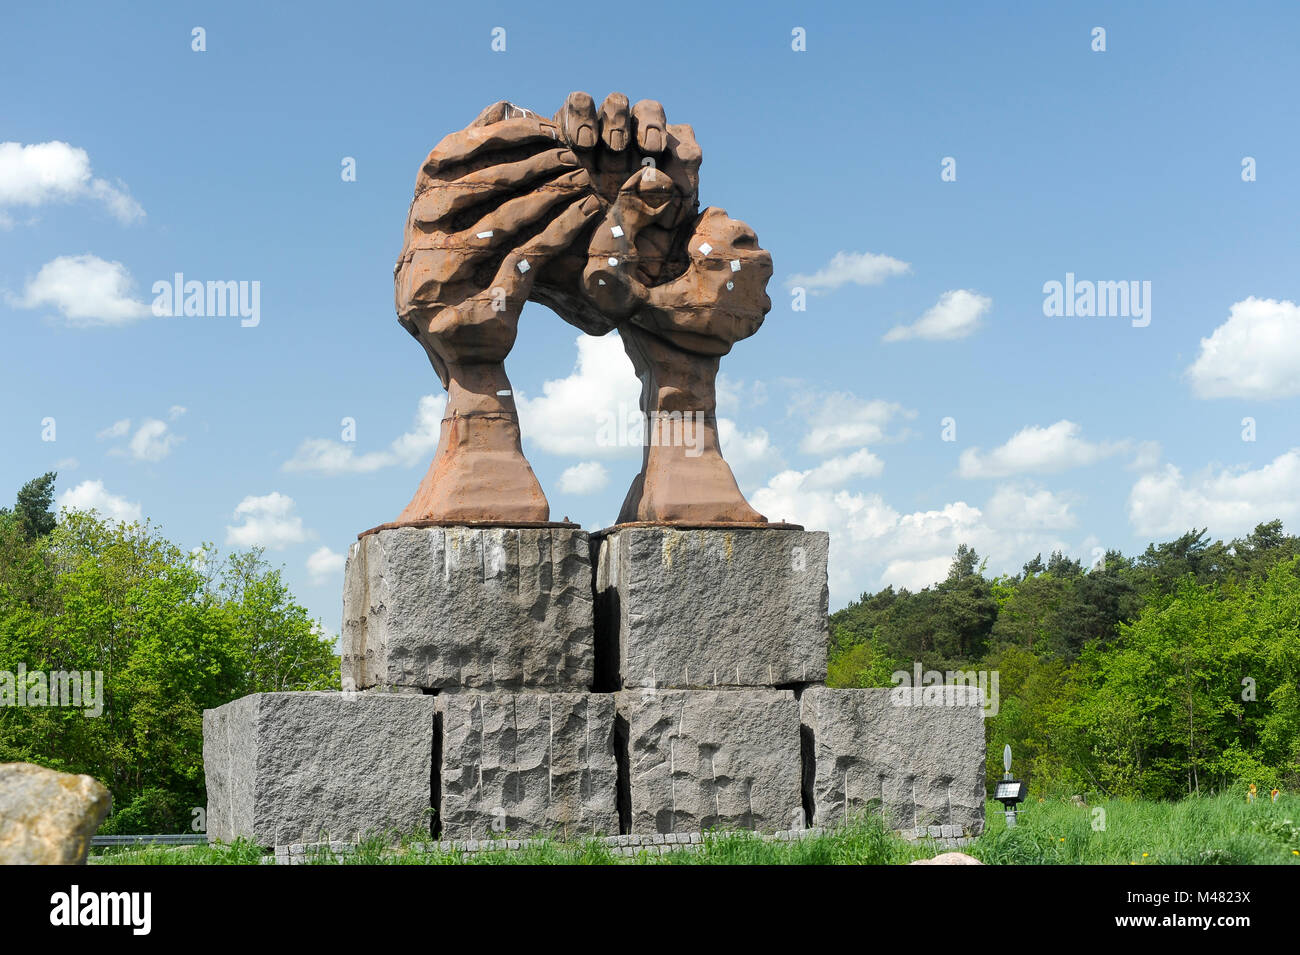 Memorial sculpture Die Wolbung der Hande (The Curvature of the Hands) from 1995 by Jose Castell on West German side of the former DDR (Grenzubergangss Stock Photo